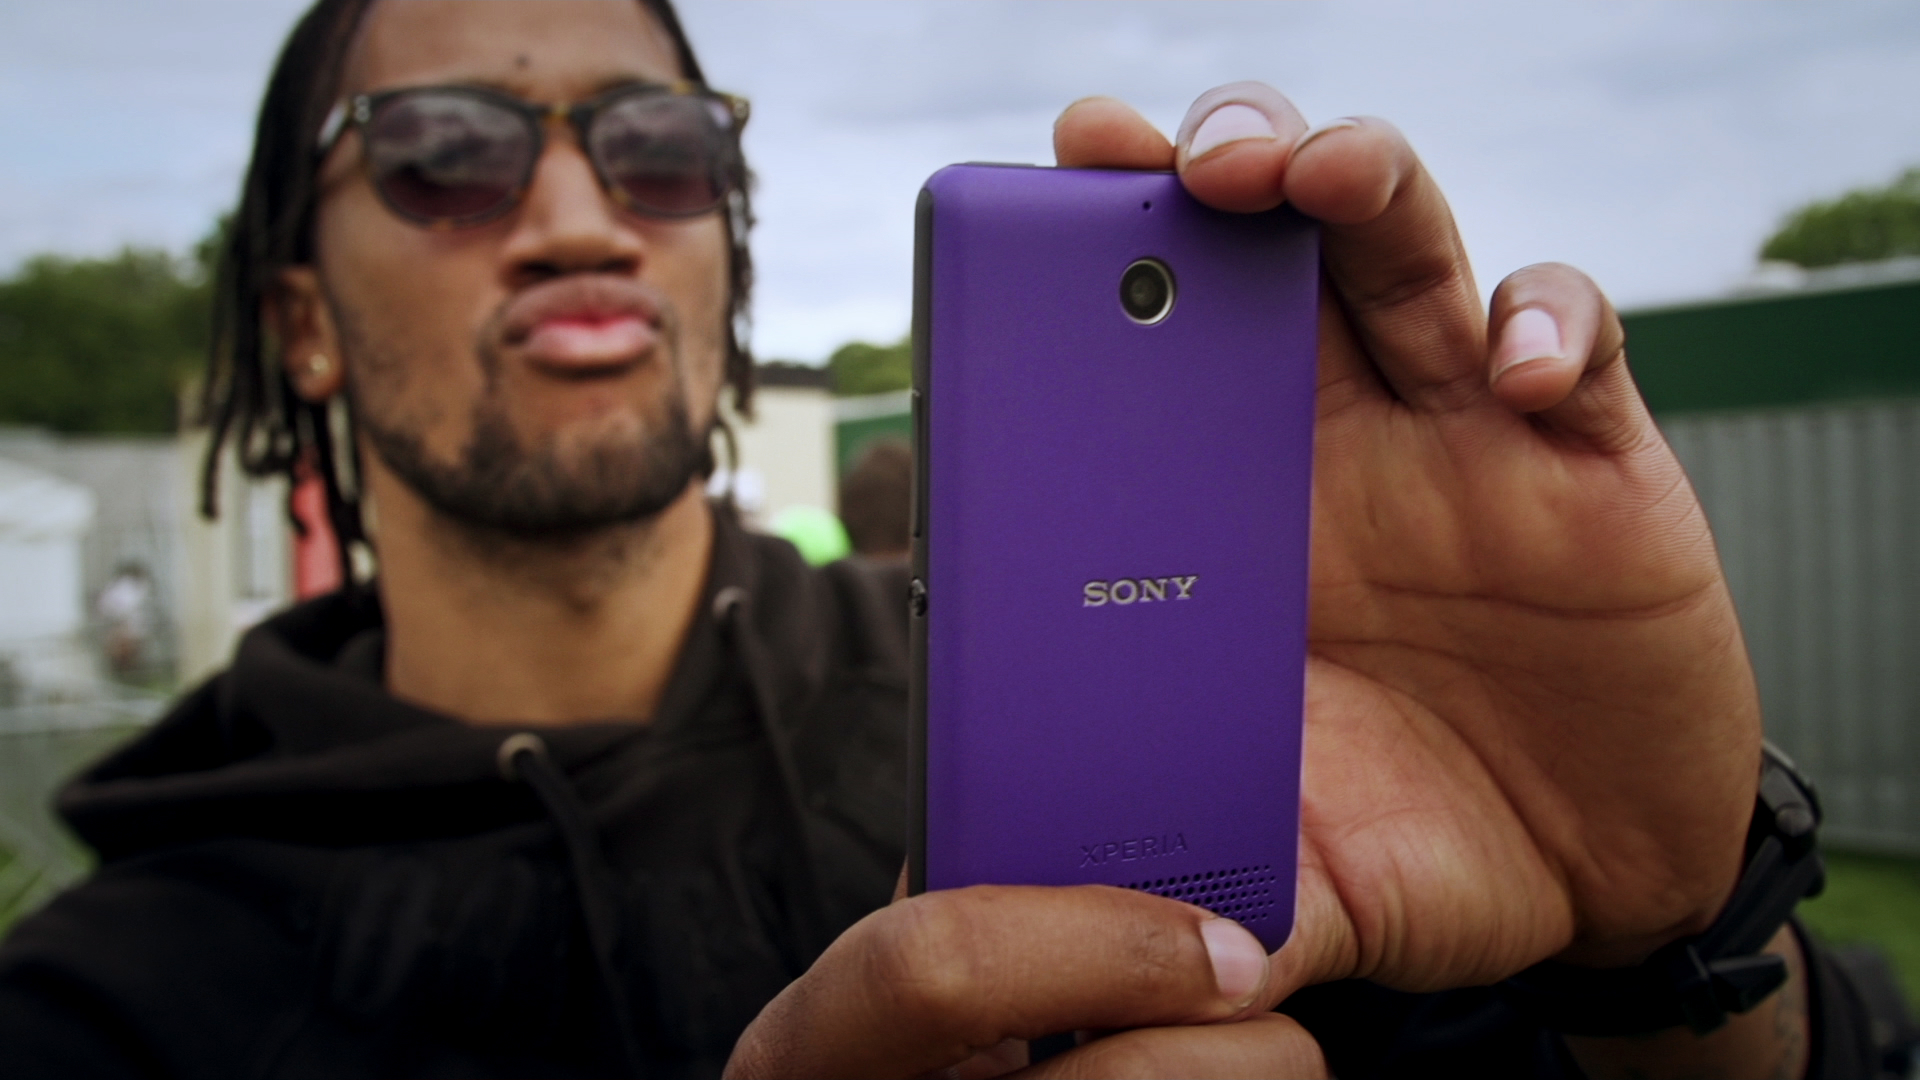 VIDEO EXCLUSIVE: POET, CRAIG MITCH AND MAYA JAMA CHECK OUT THE XPERIA E1 FROM SONY AT SW4 FESTIVAL